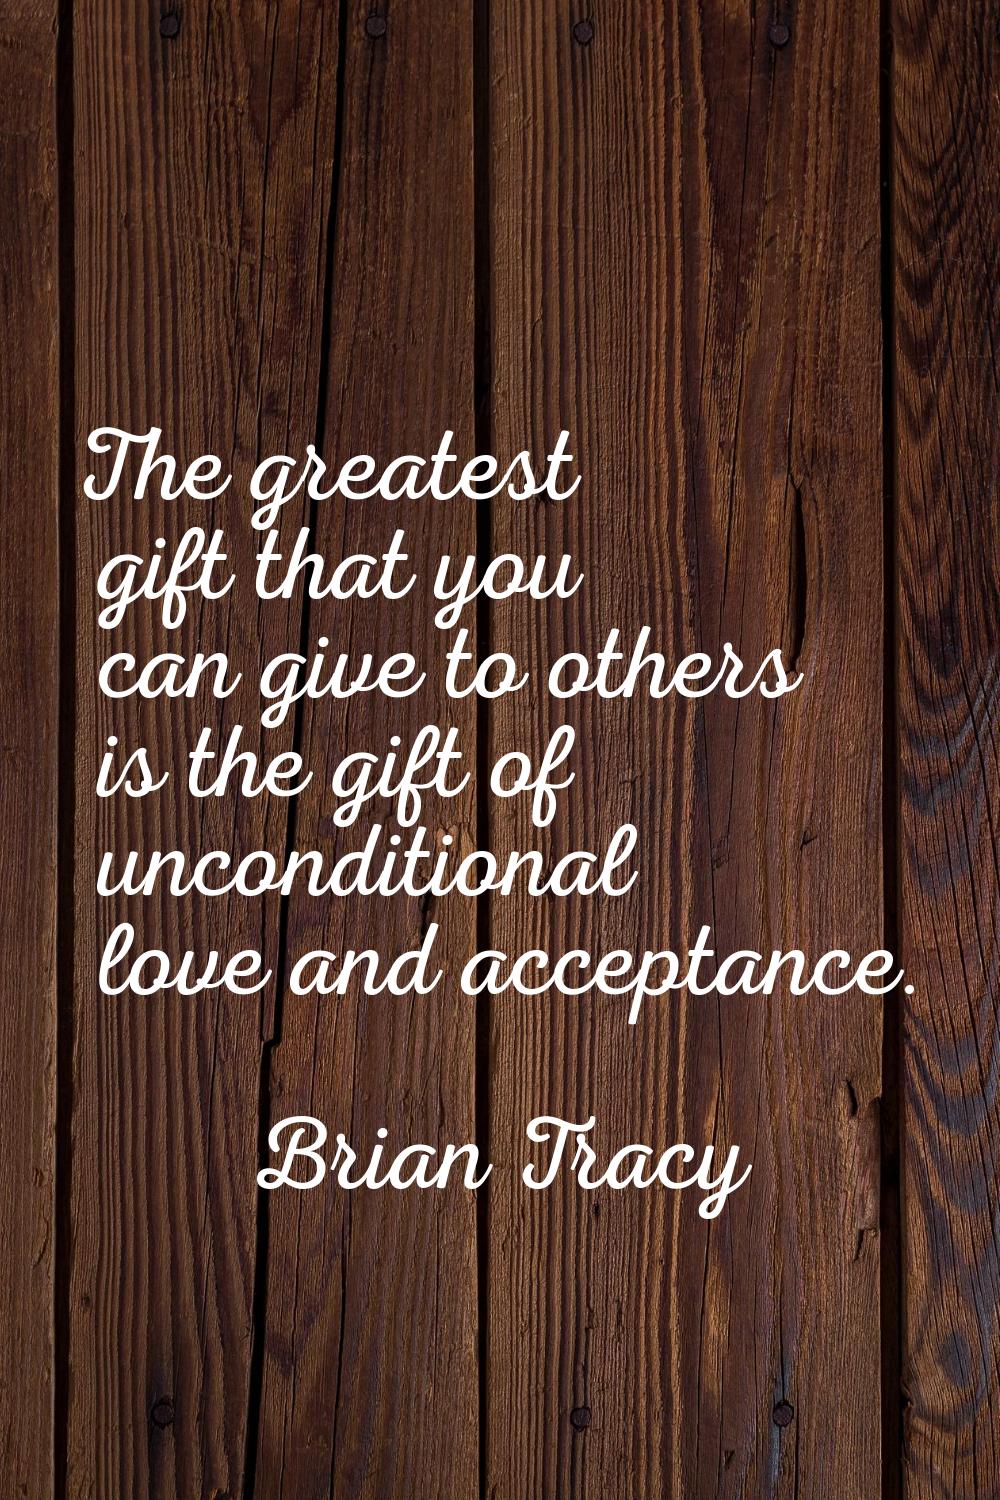 The greatest gift that you can give to others is the gift of unconditional love and acceptance.